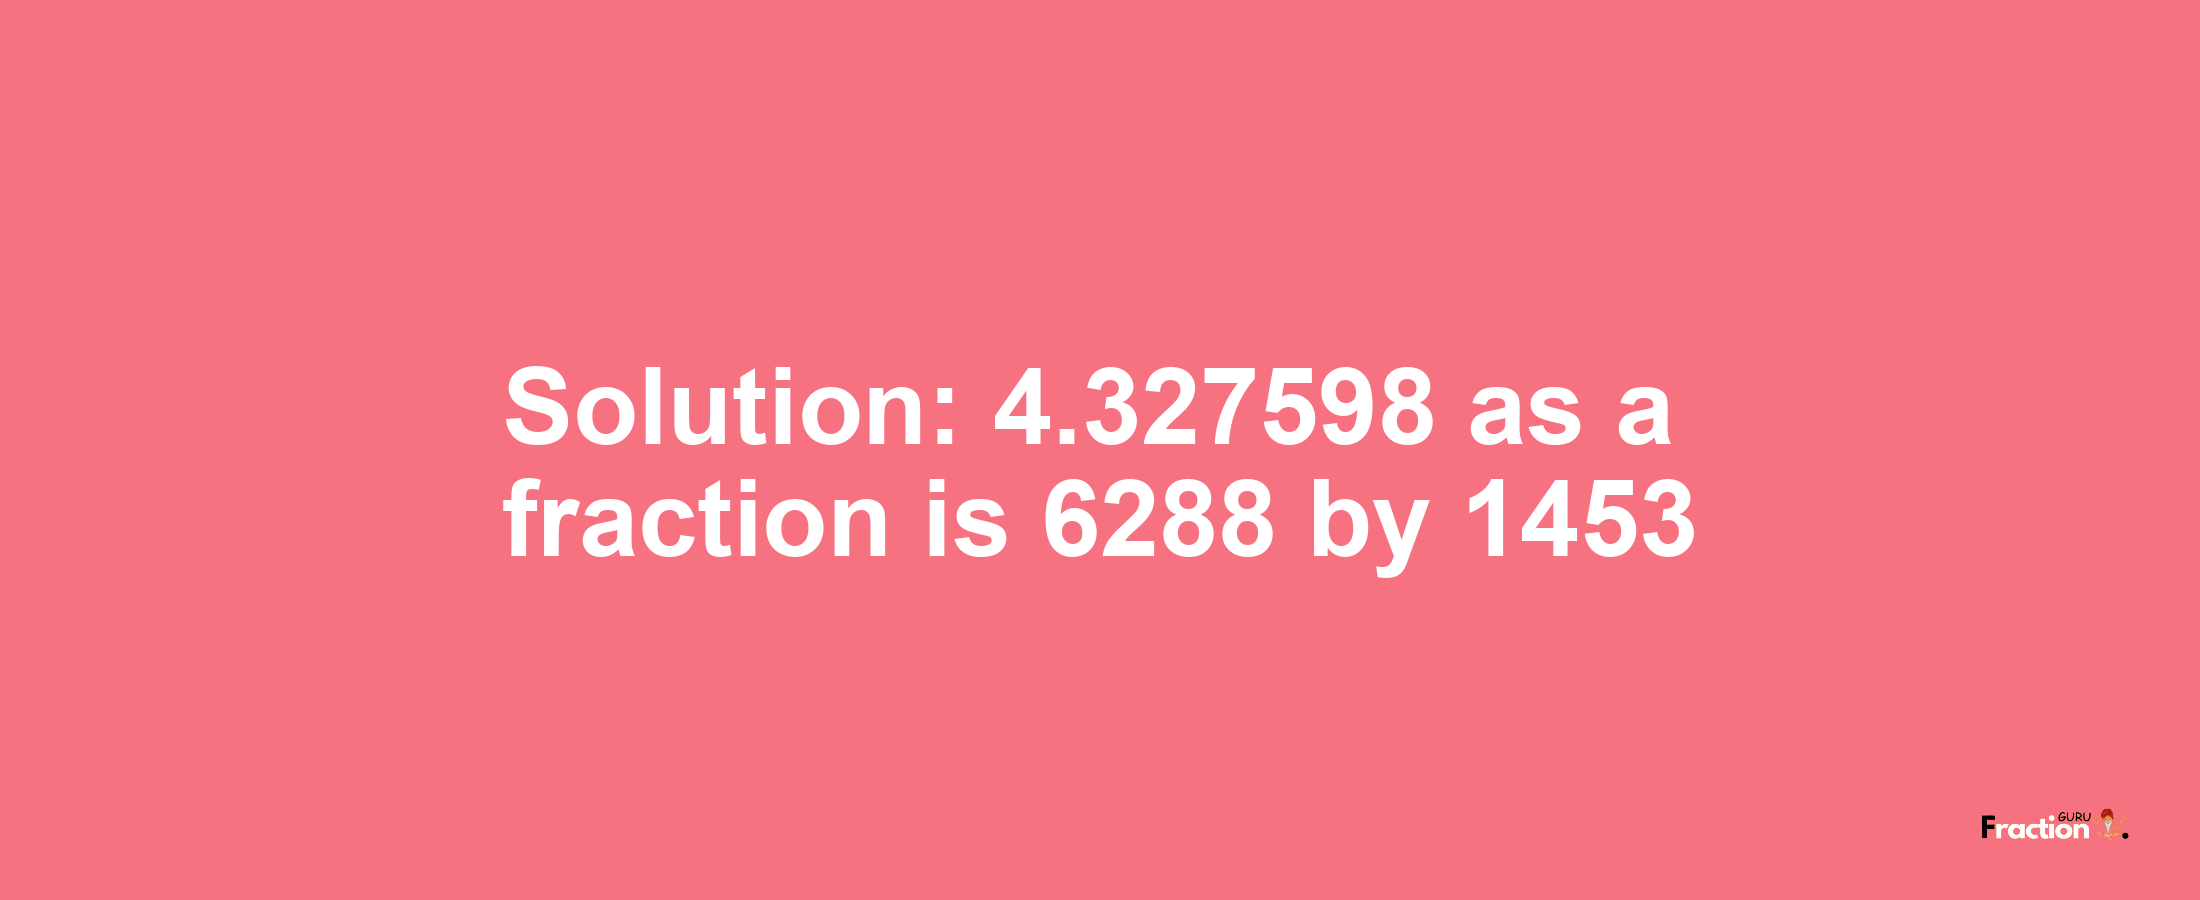 Solution:4.327598 as a fraction is 6288/1453